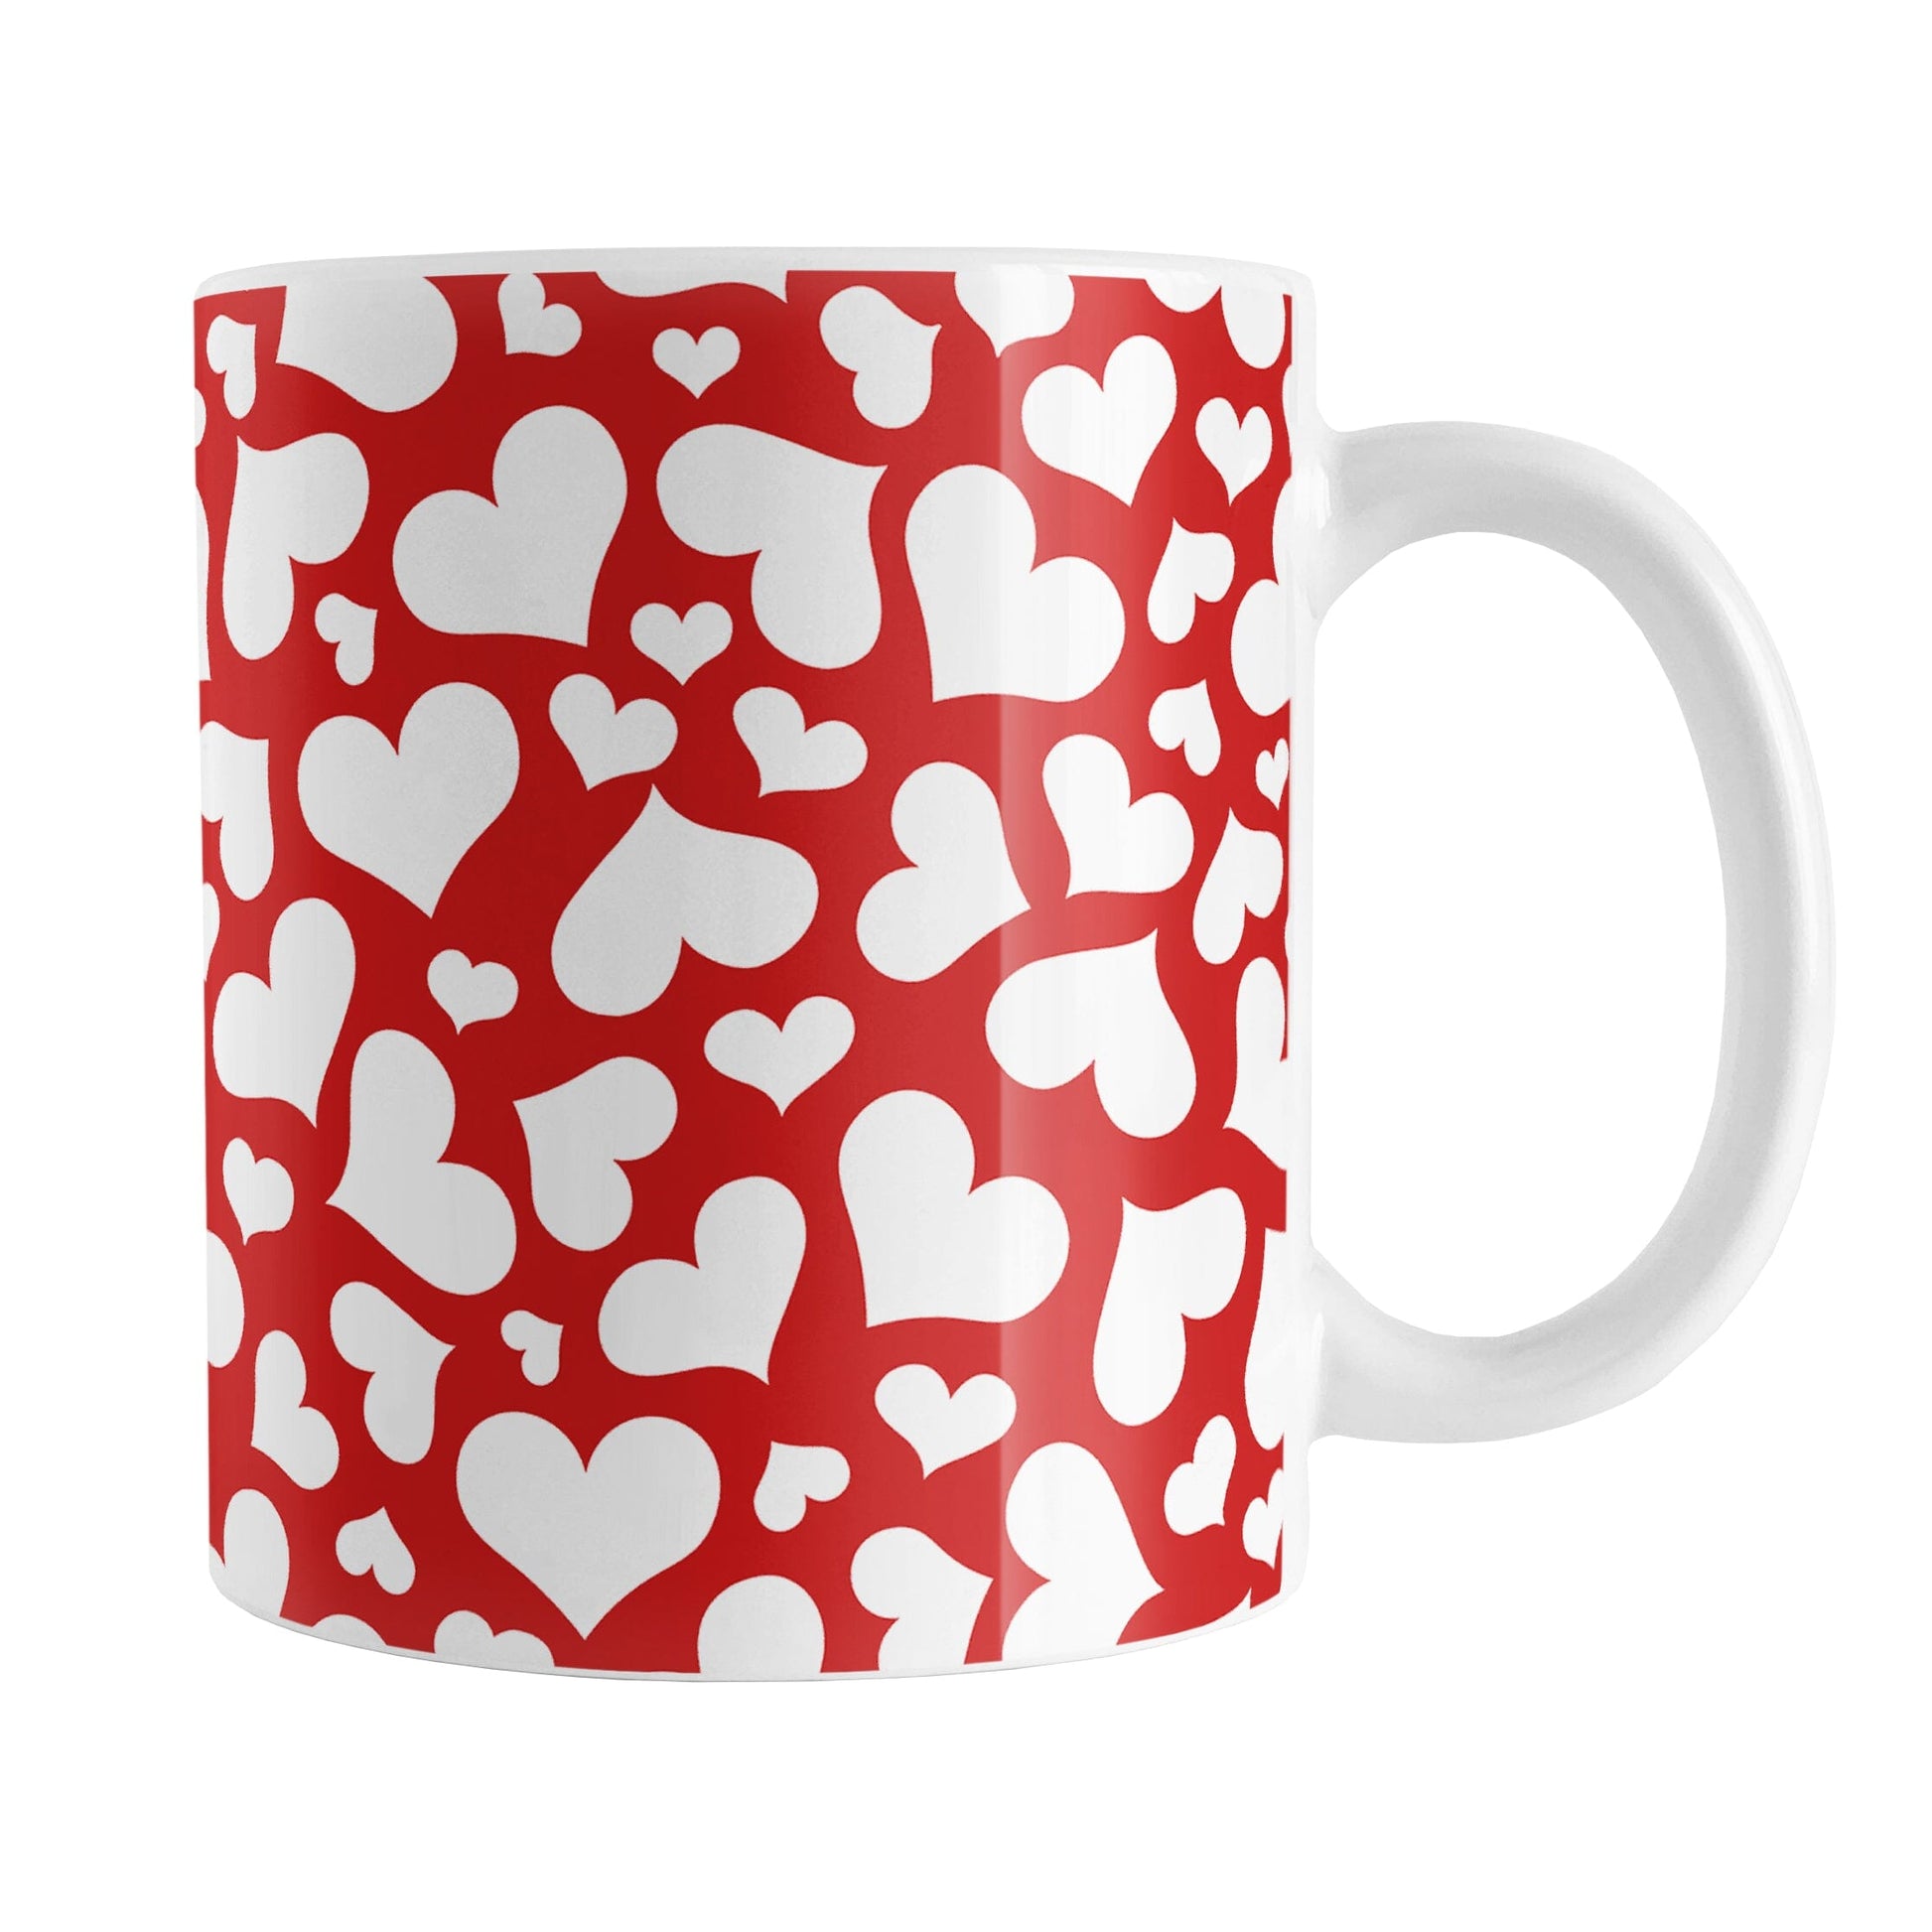 Cute White Hearts on Red Mug (11oz) at Amy's Coffee Mugs. A ceramic coffee mug designed with a multi-directional pattern of cute white hearts over a red background color that wraps around the mug to the handle.